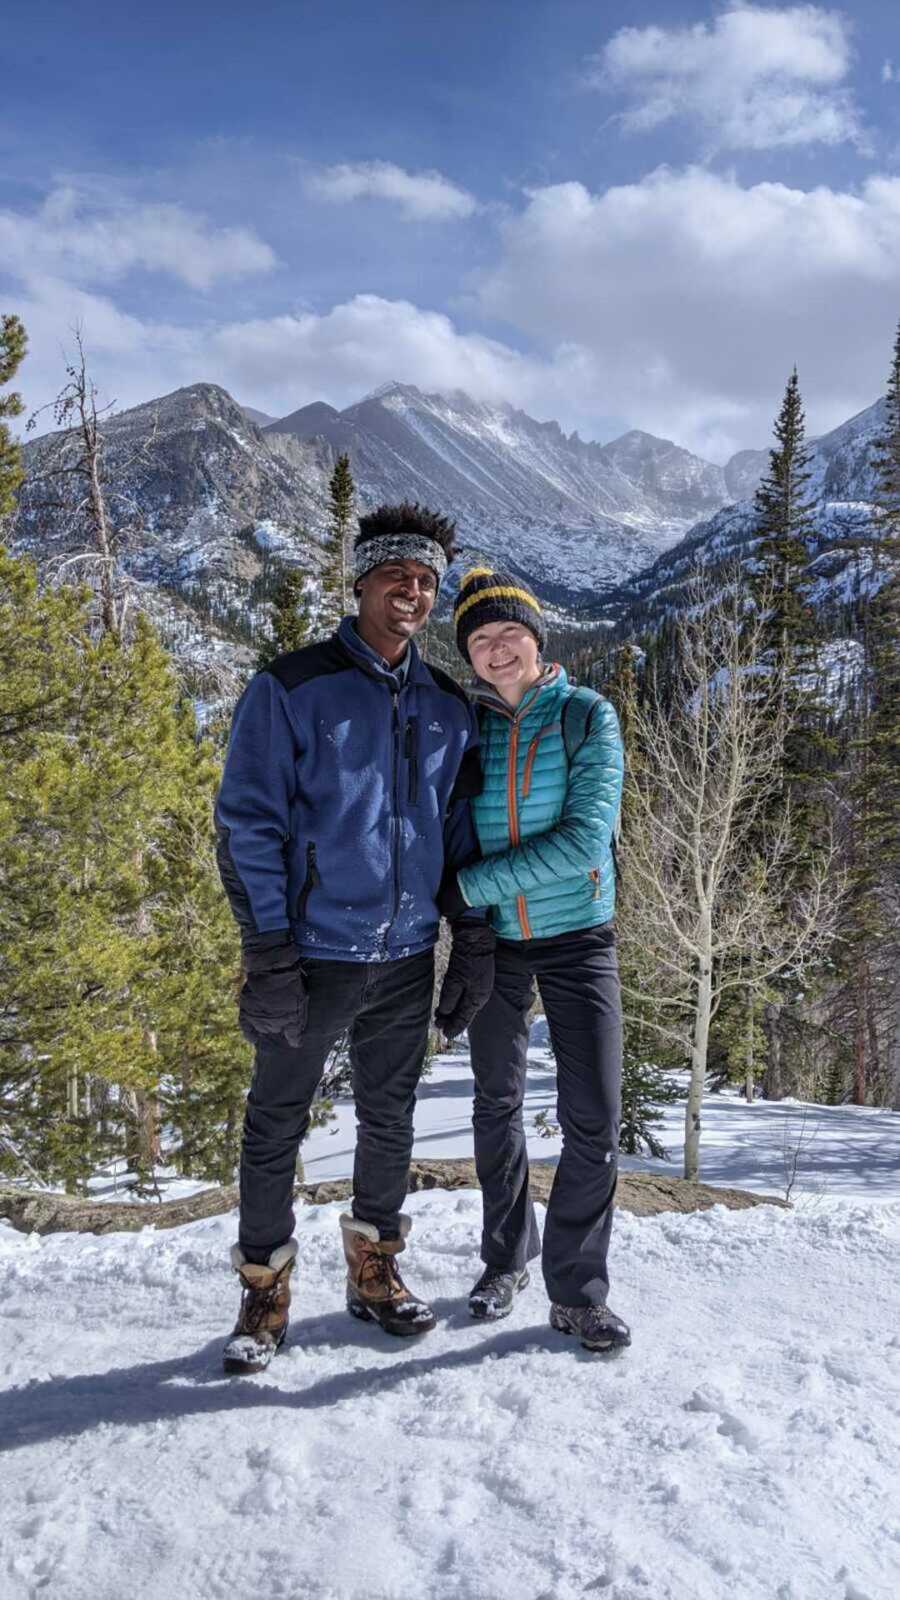 Couple together in the snowy mountains with winter gear on